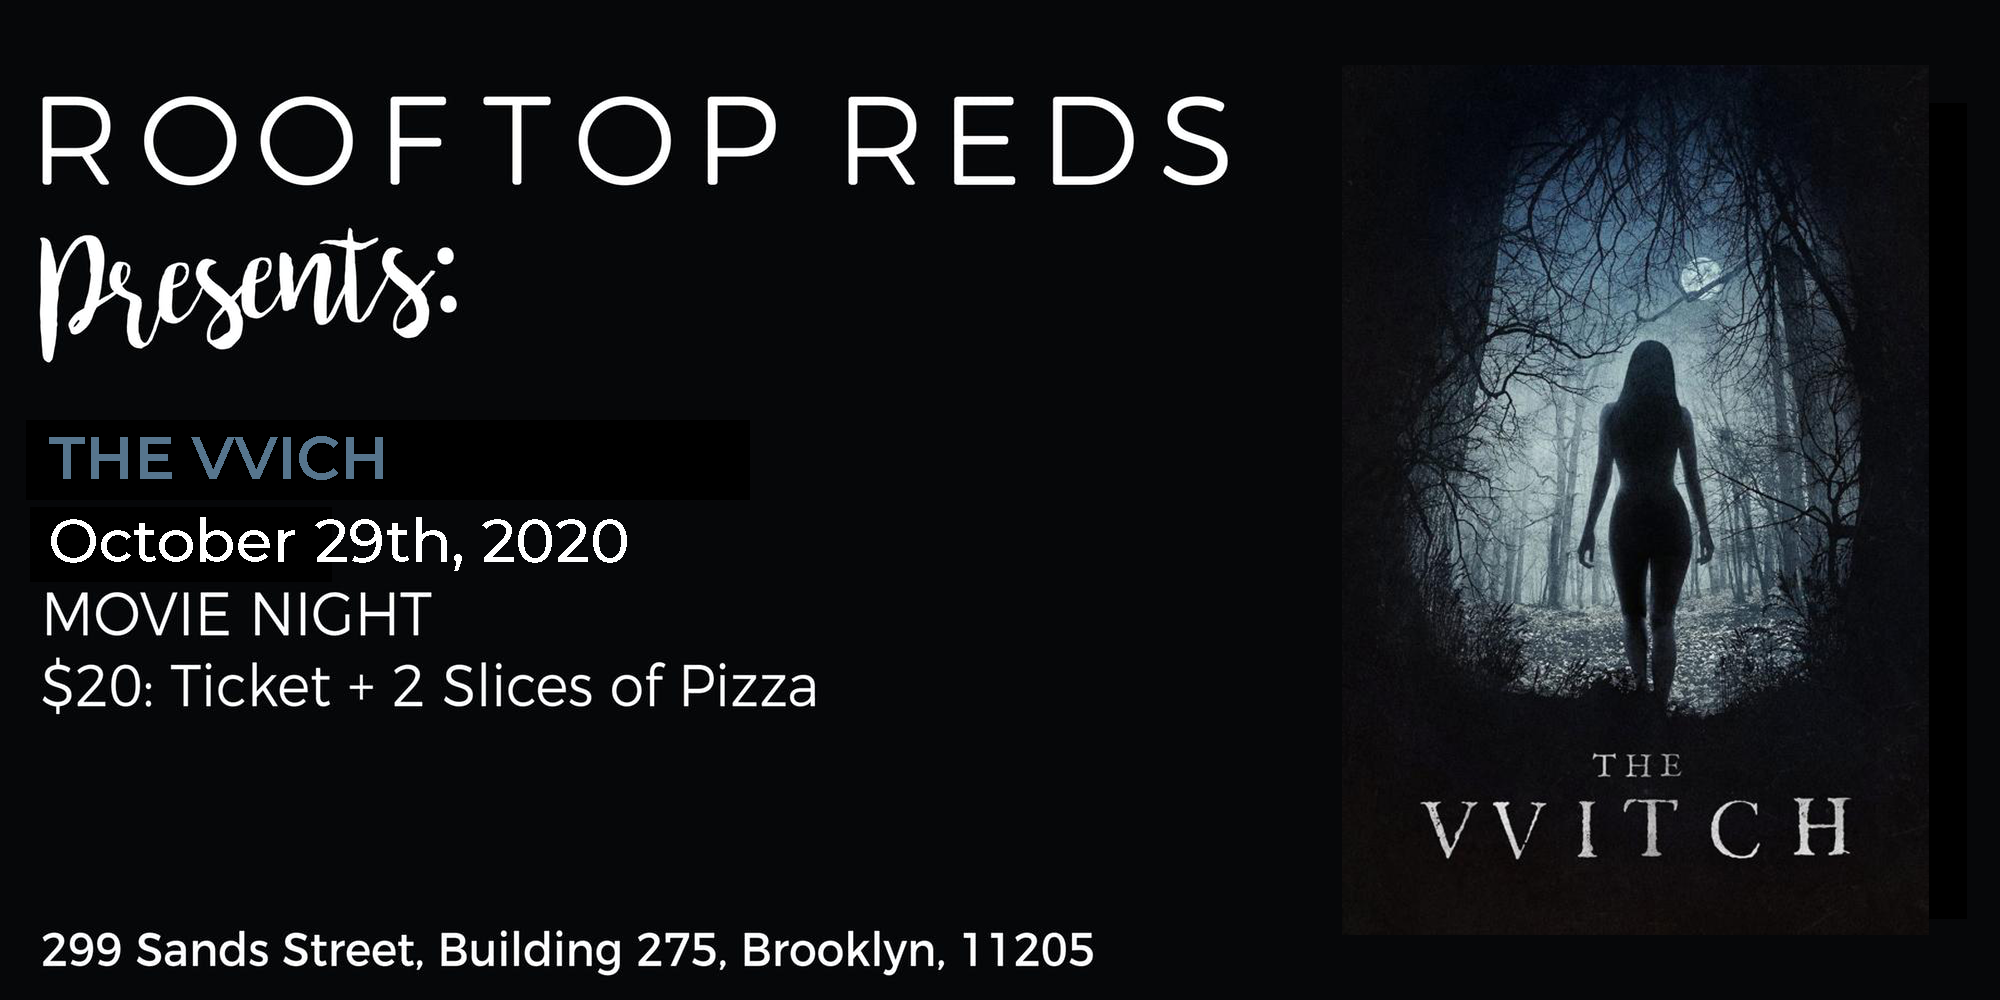 Rooftop Reds Presents: The VVItch